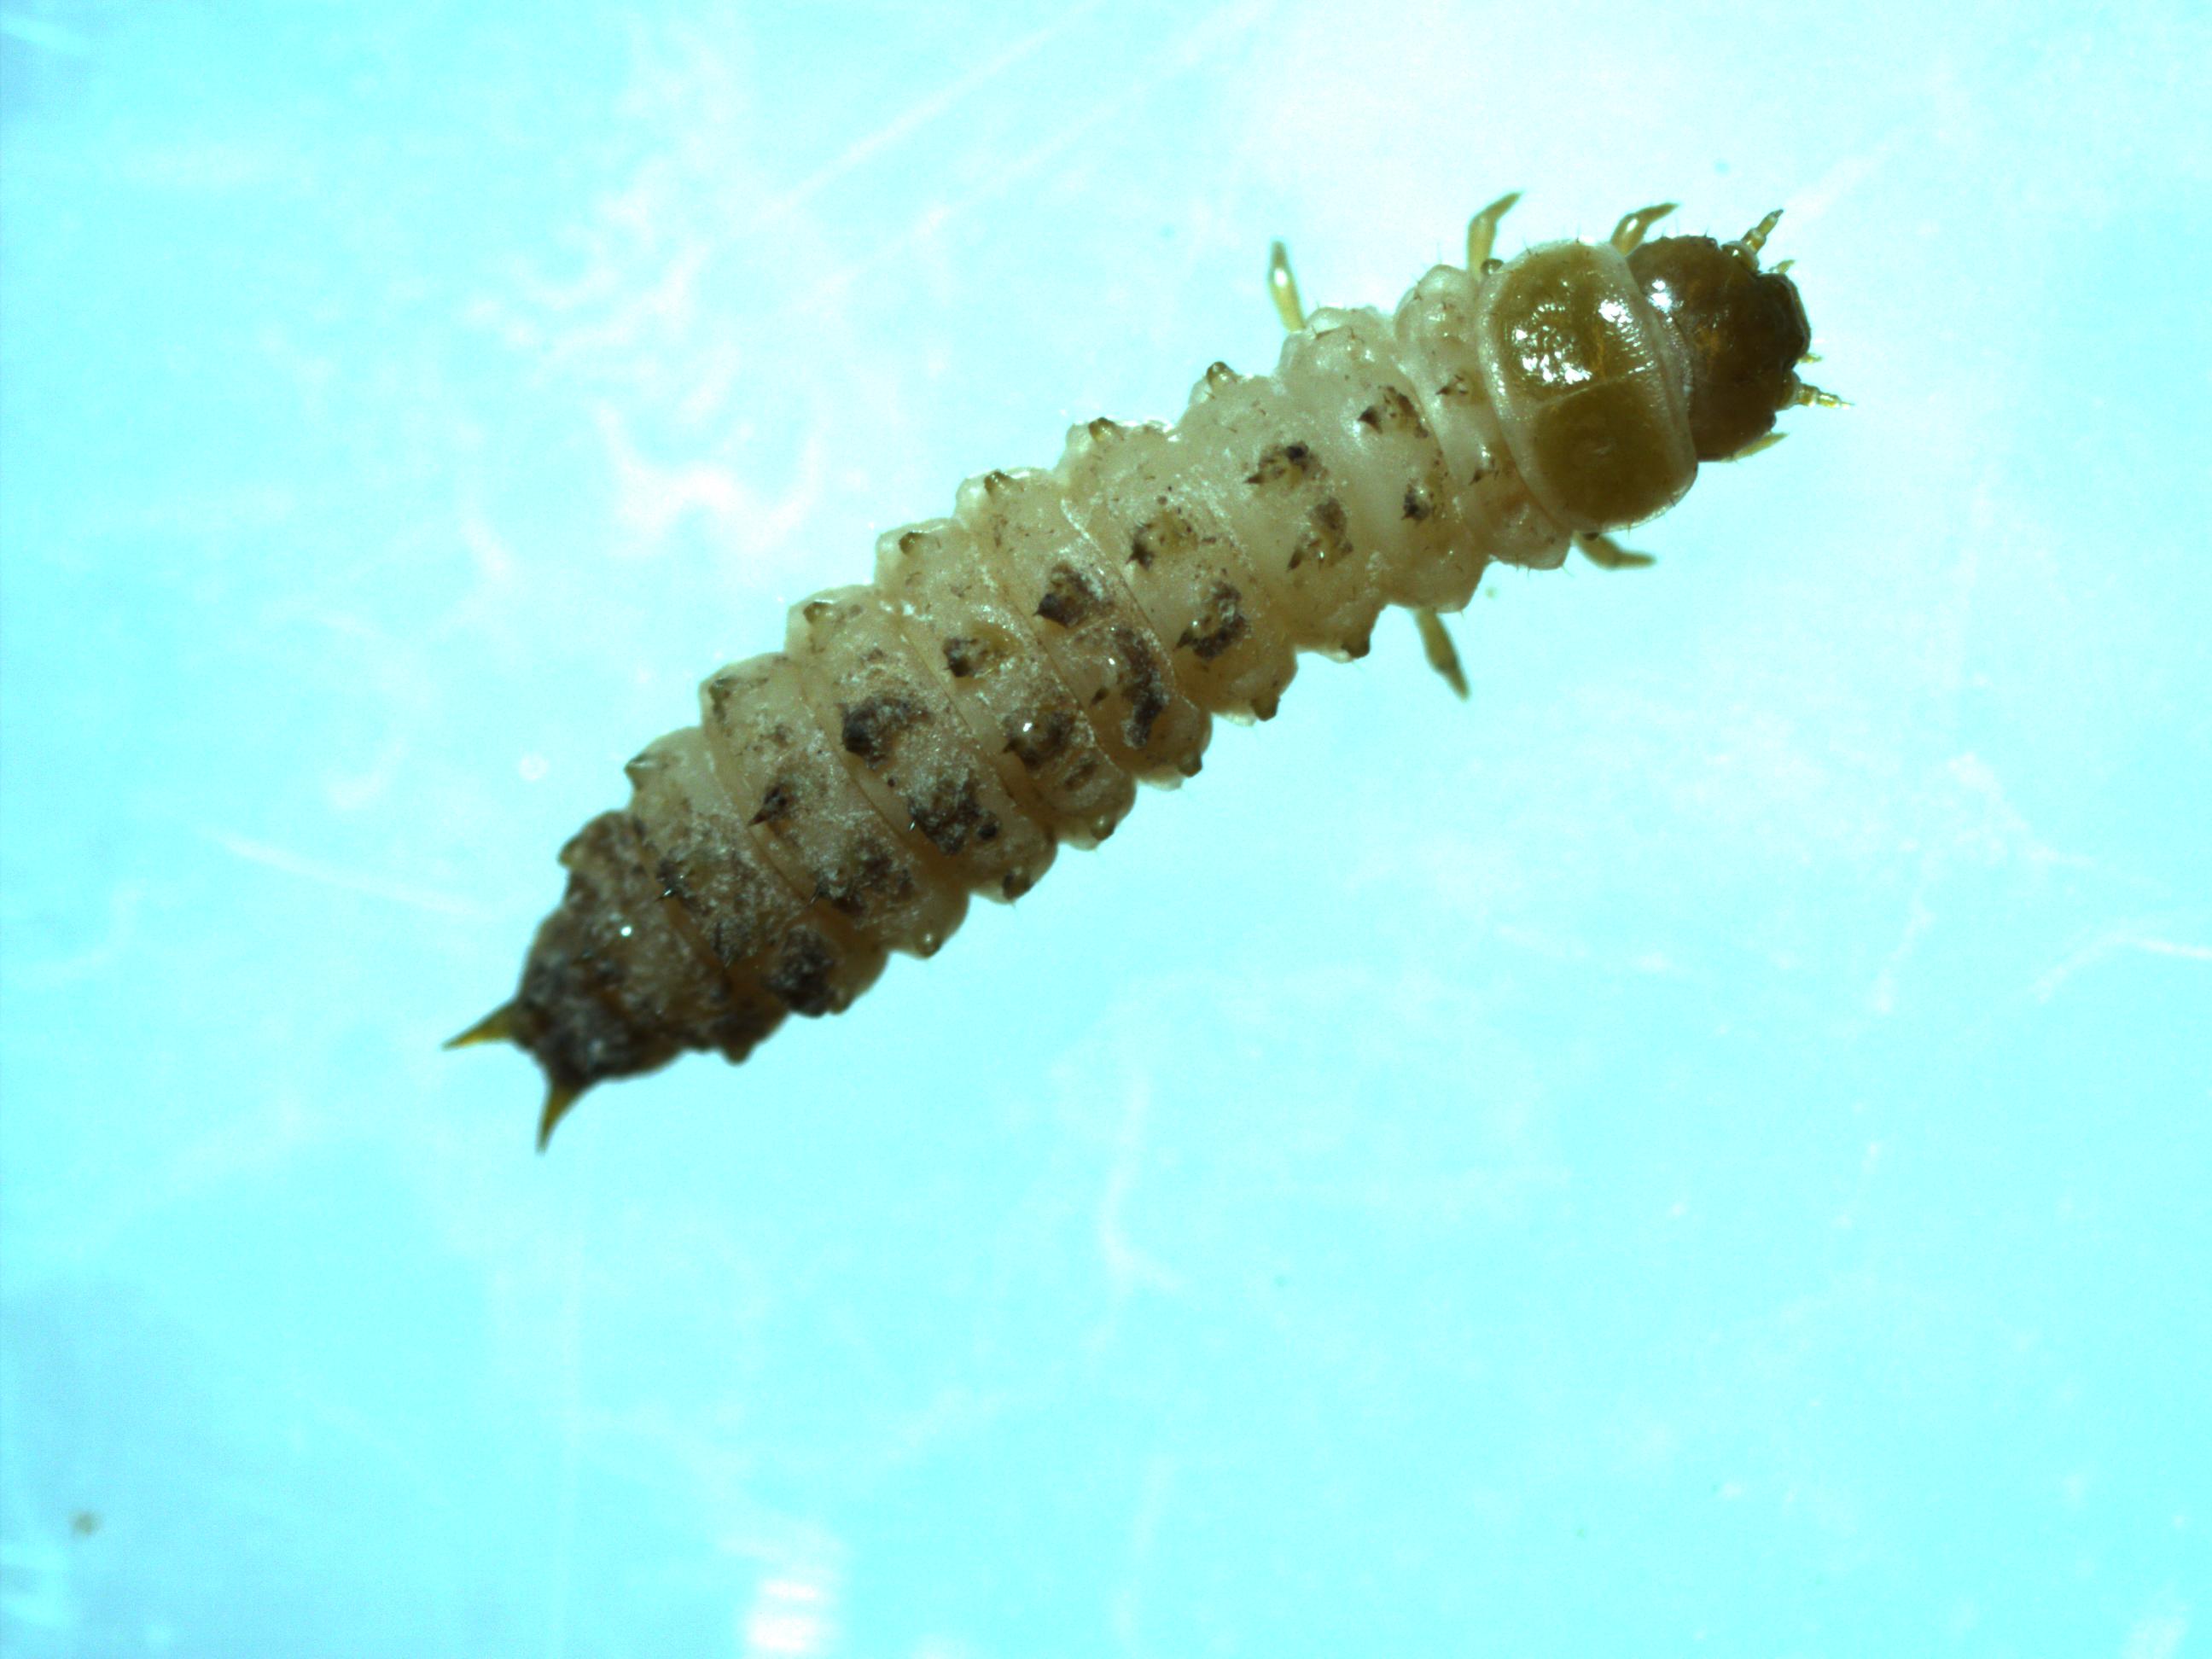 Top view of a small hive beetle larva